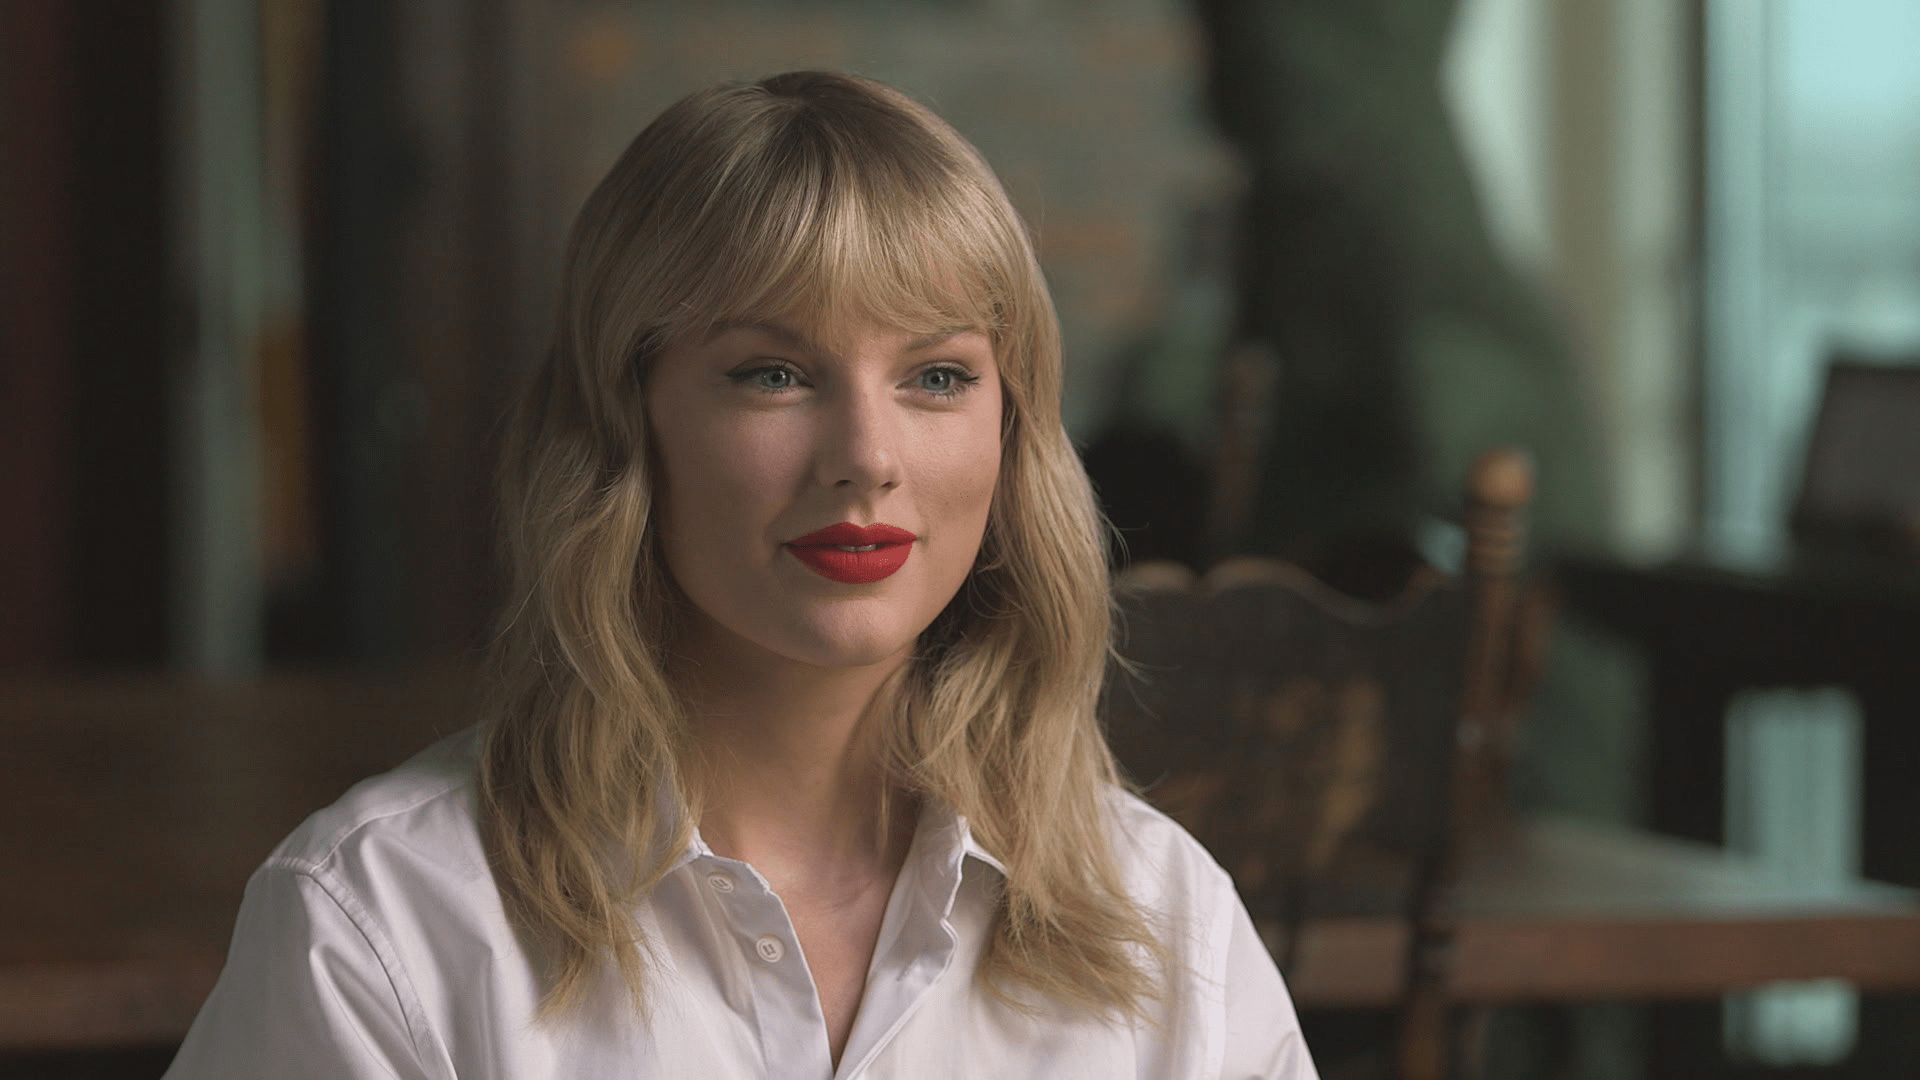 5 Reasons Why Taylor Swift Said No To Romantic Comedy Roles